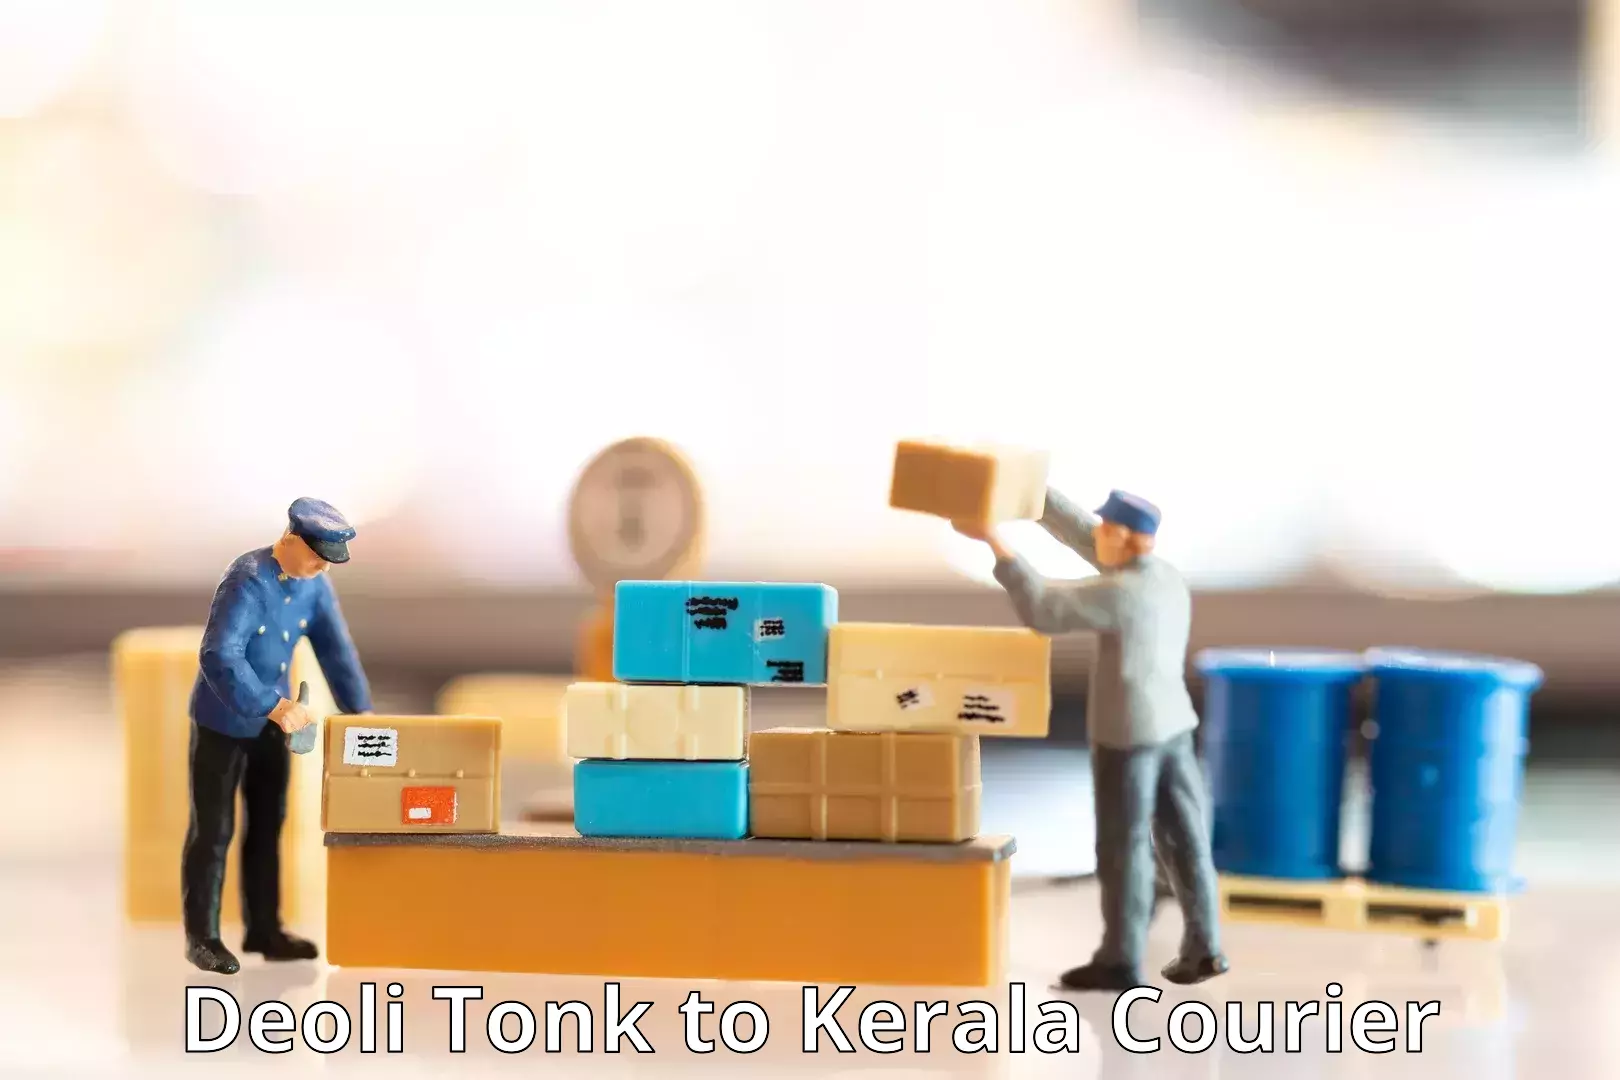 State-of-the-art courier technology Deoli Tonk to Nochad